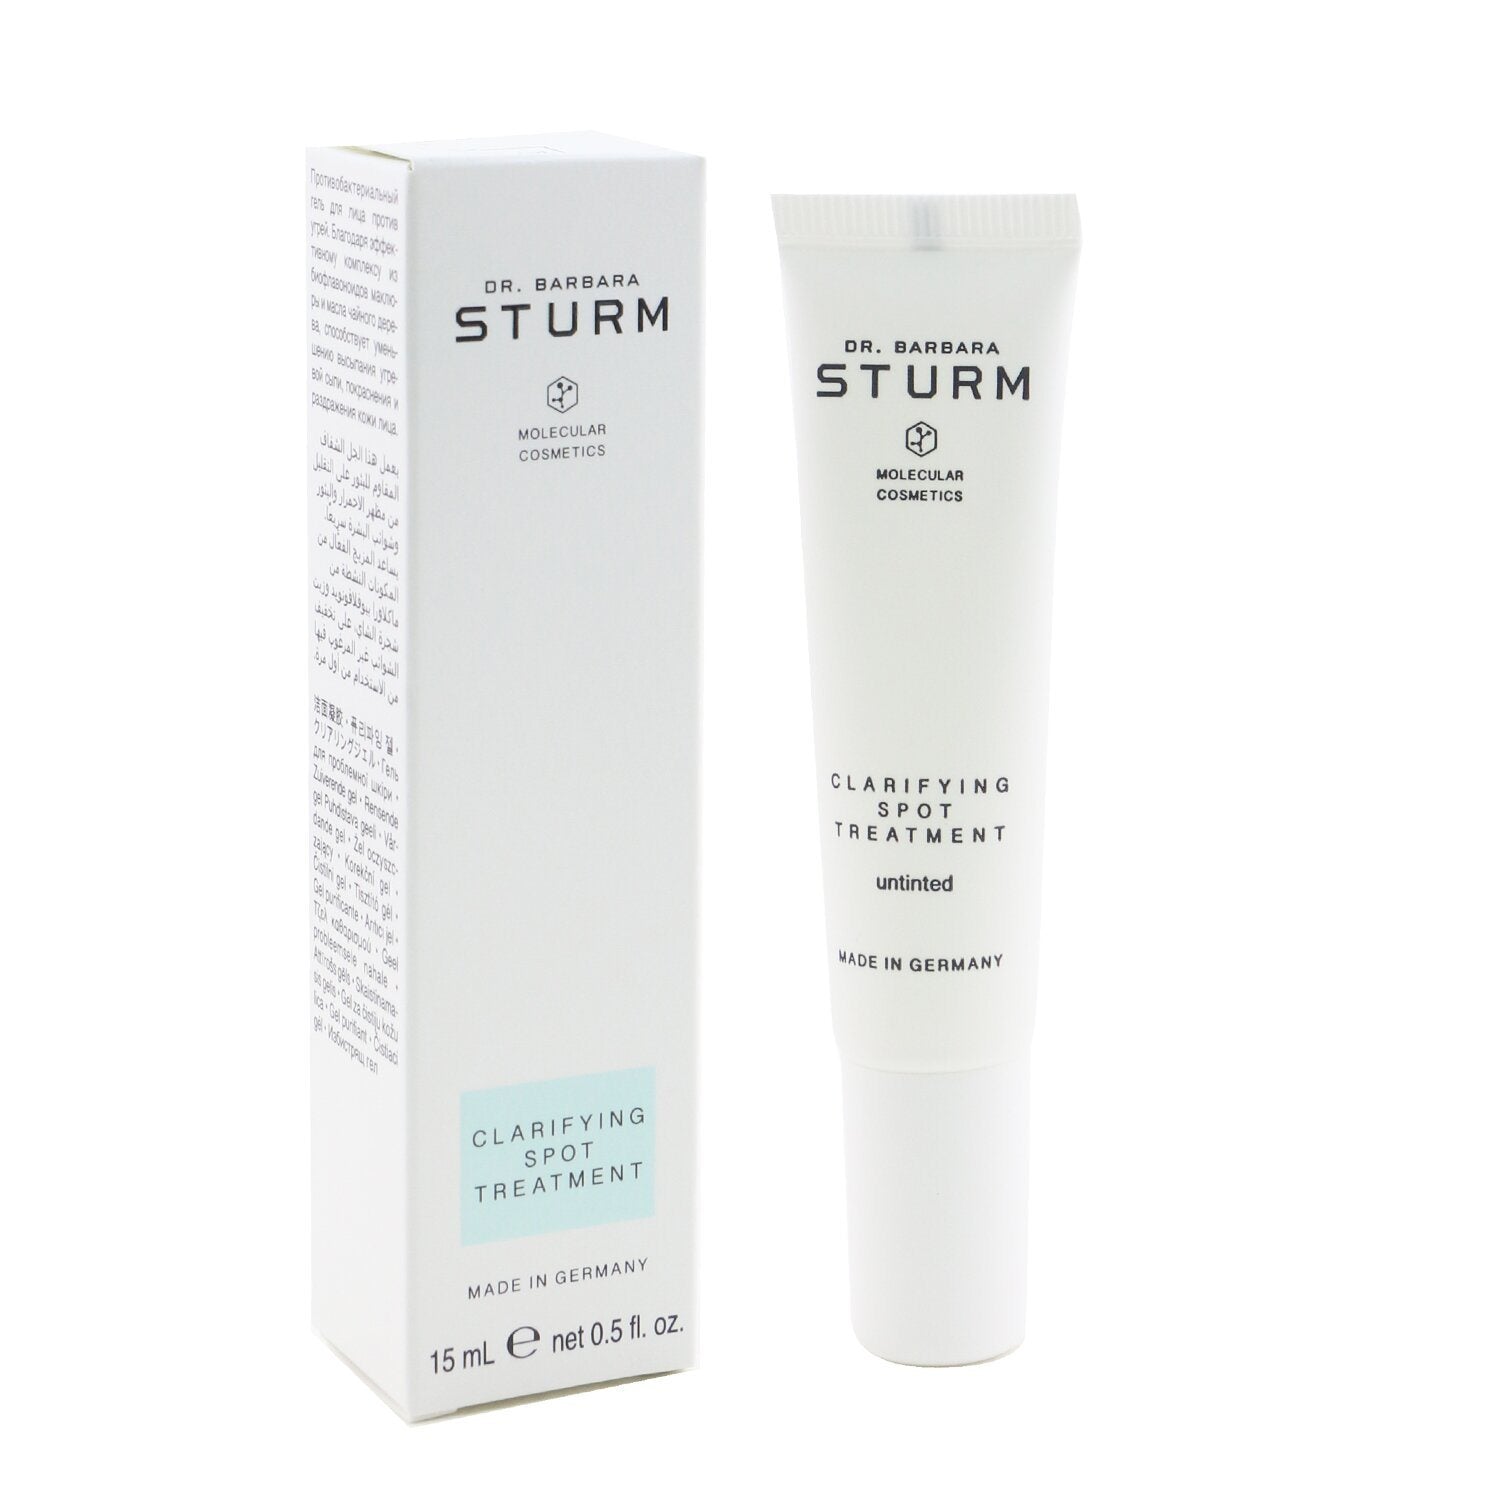 A tube of DR. BARBARA STURM - Clarifying Spot Treatment - Untinted 34292/400247 15ml/0.5oz, designed to reduce the appearance of fine lines and wrinkles, on a white background.